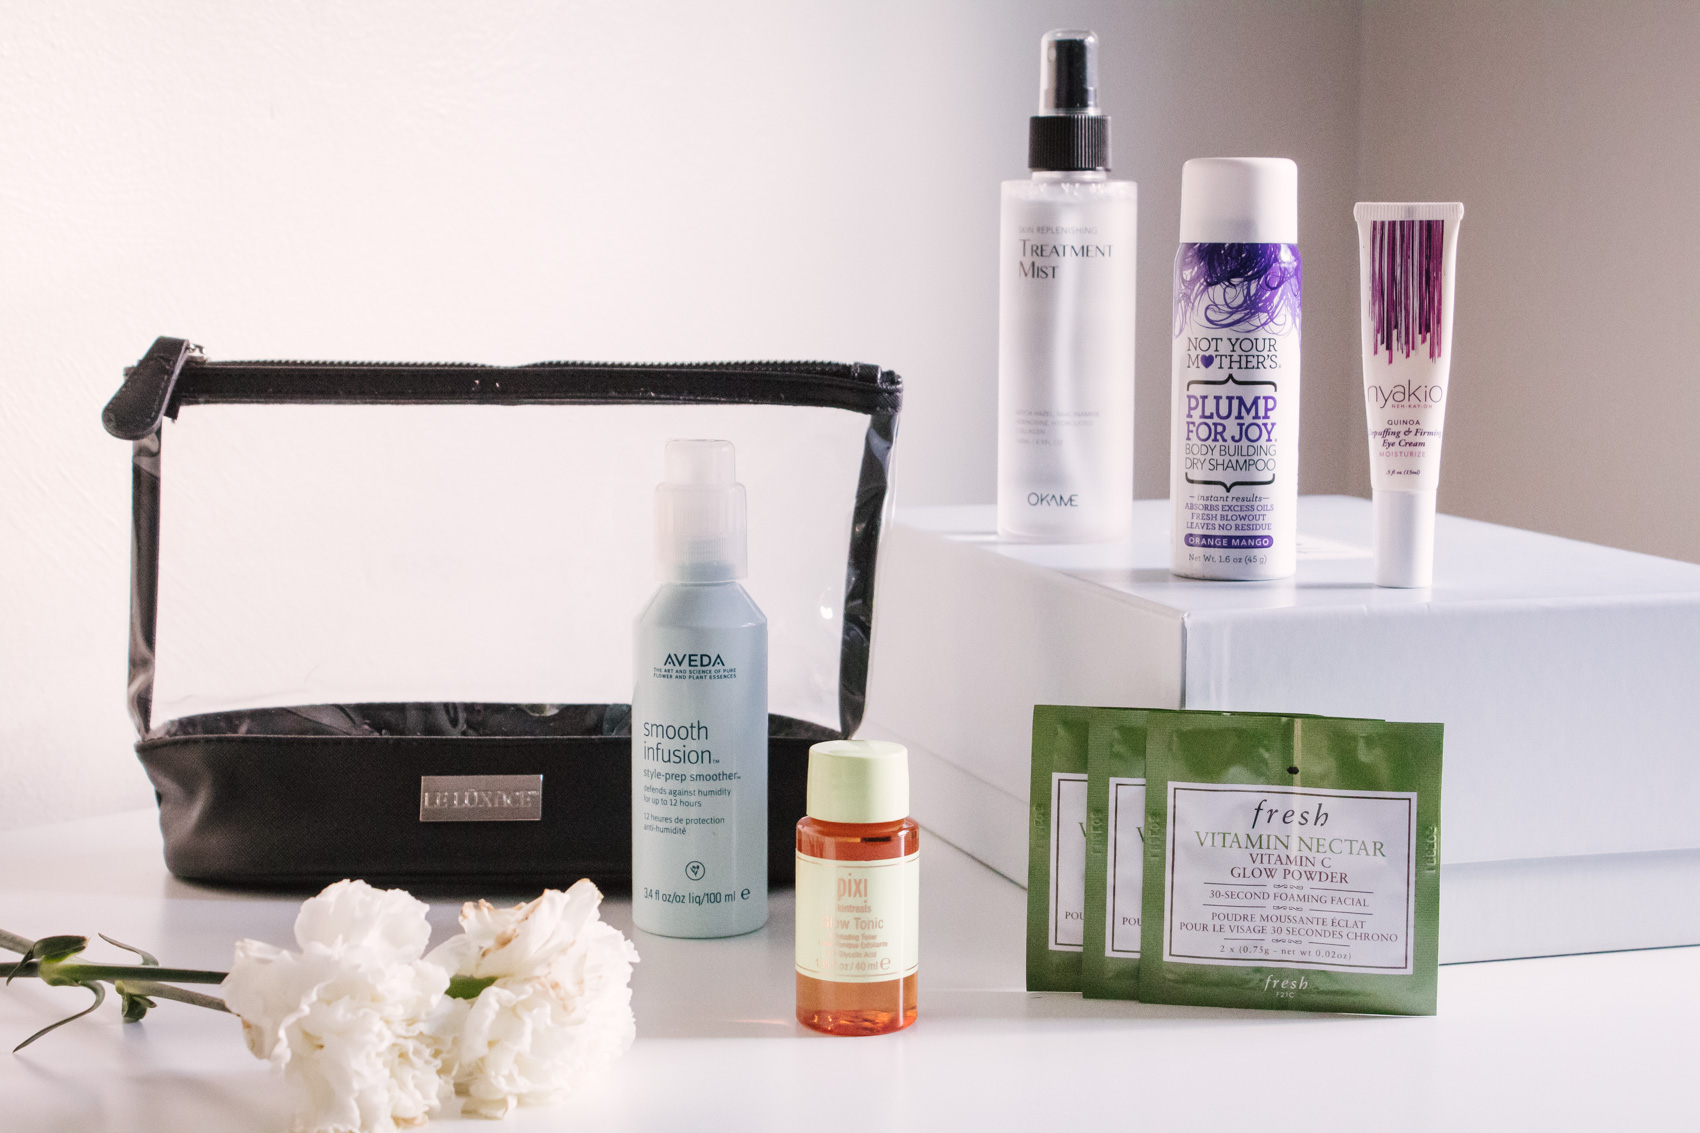 Next time you're packing for a trip, don't leave home without these 6 travel toiletries and travel beauty essentials to keep your skin fresh and protected! Plus, check out this clear makeup bag!